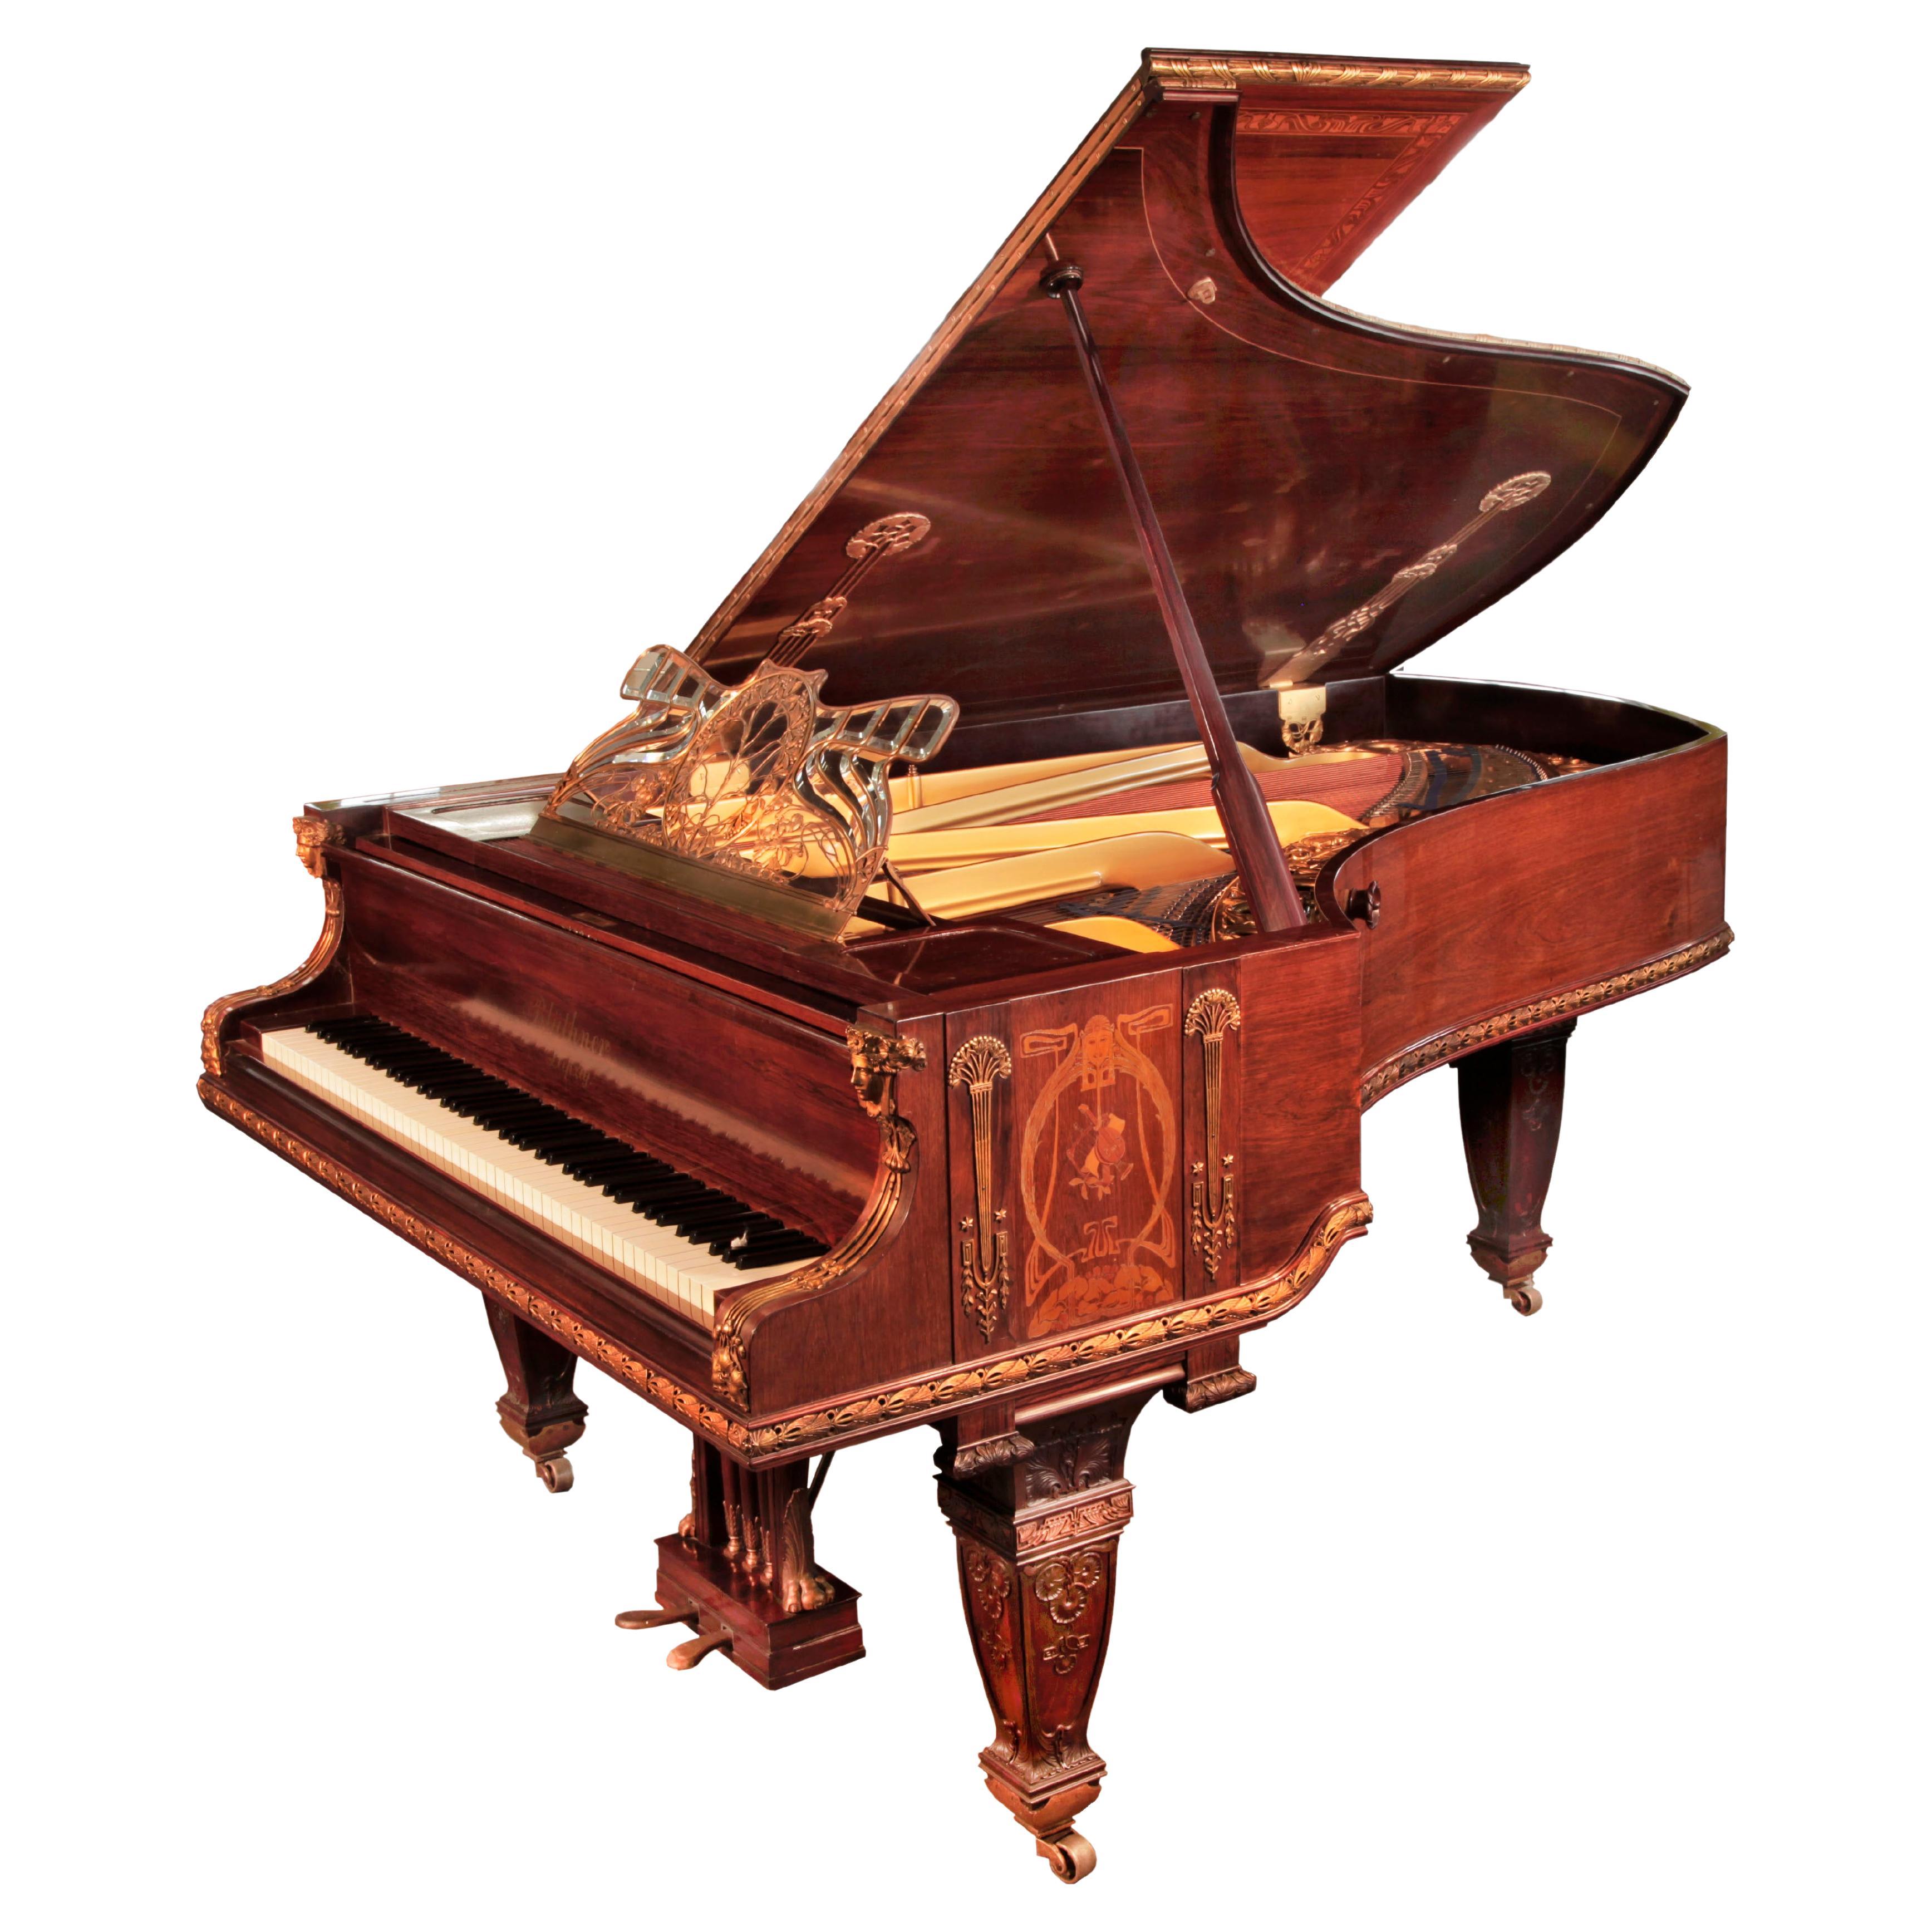 King Edward VII Royal Bluthner Piano Exhibited in Paris Exhibition 1900 For Sale